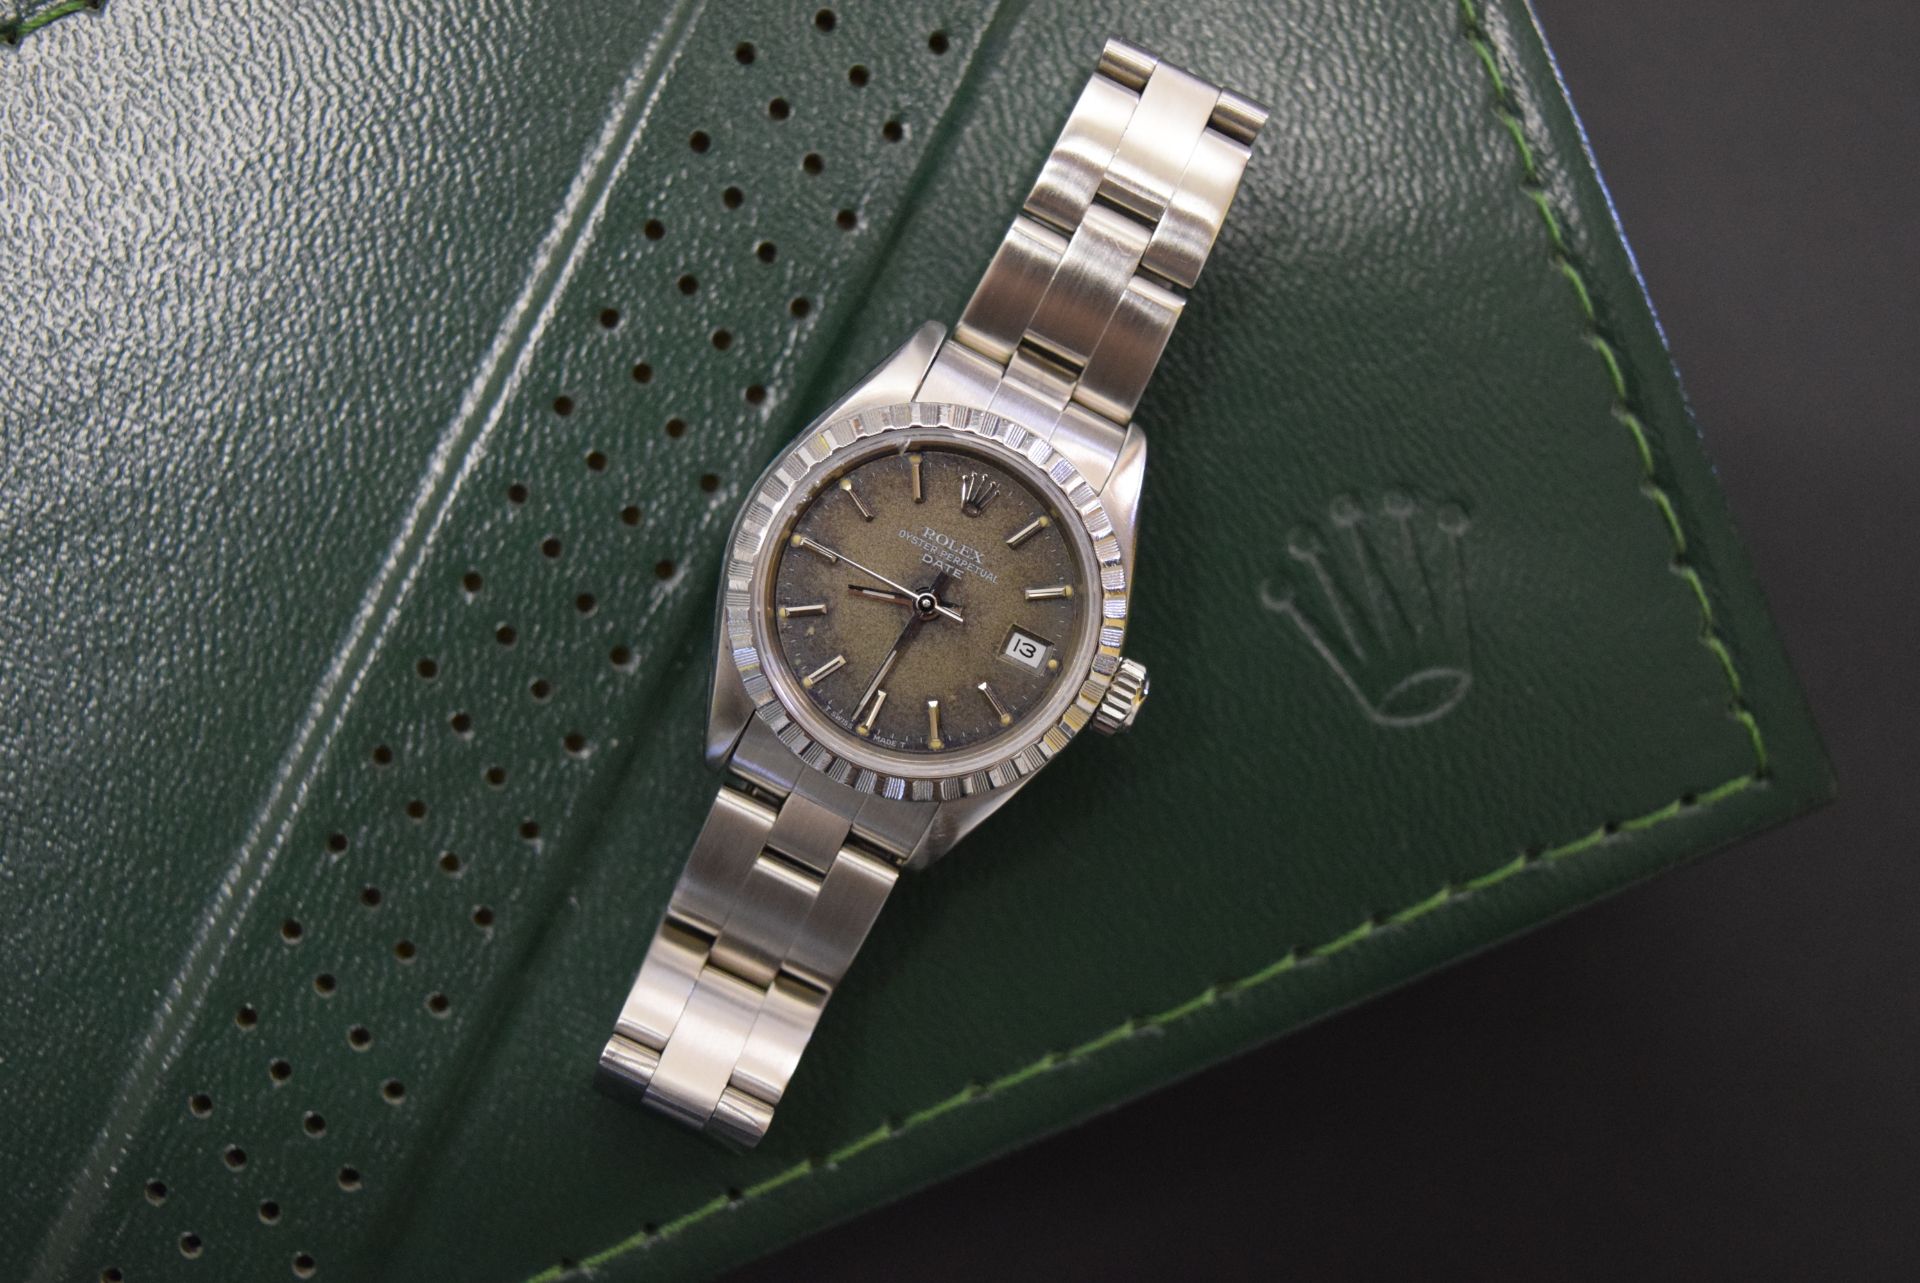 *Patina* Rare Rolex Oyster 'Date' - With box - To be sold at no reserve